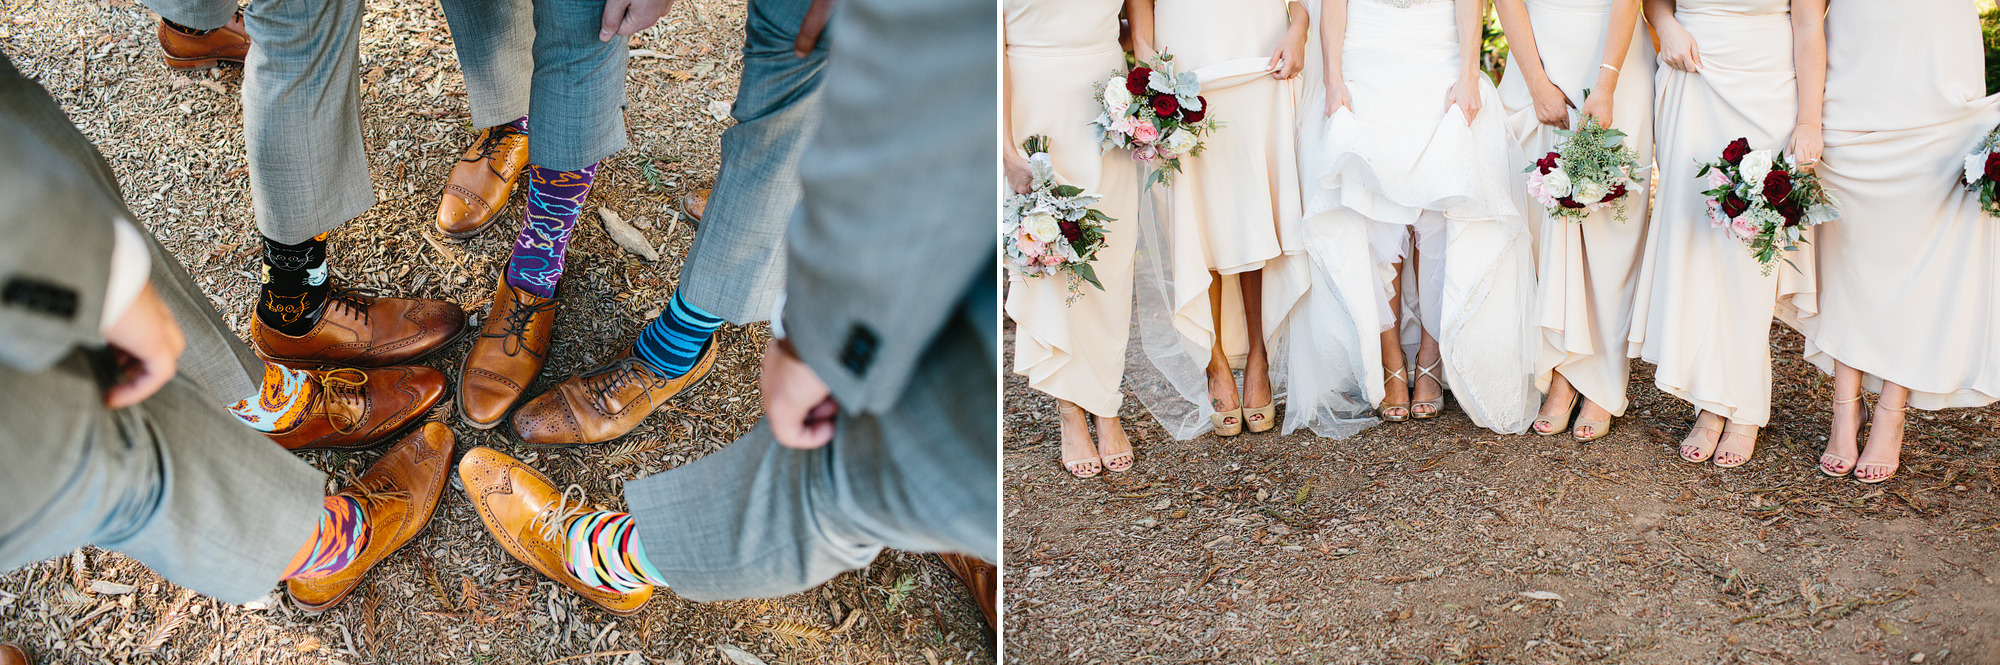 The bridal party's shoes and groomsmen's fun socks. 